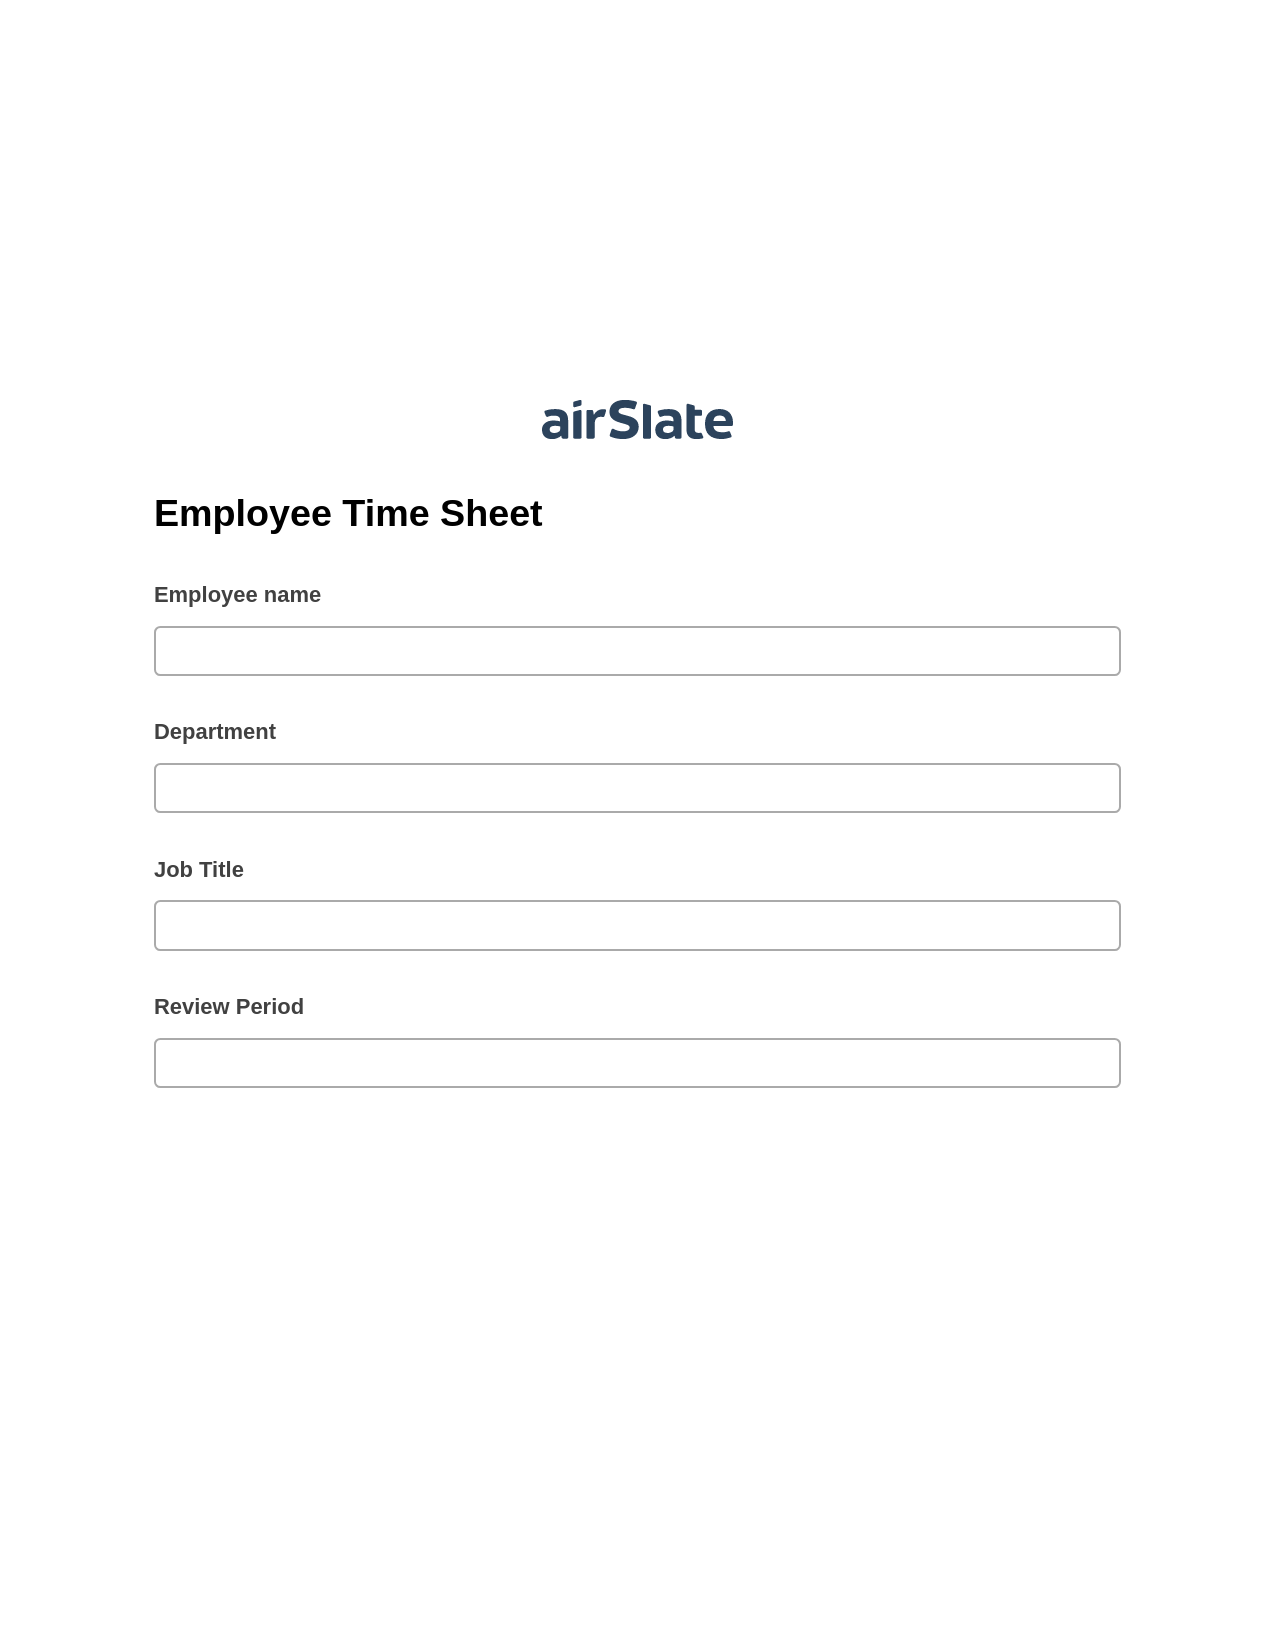 Multirole Employee Time Sheet Pre-fill from Smartsheet Bot, Update Salesforce Records Bot, Archive to Google Drive Bot